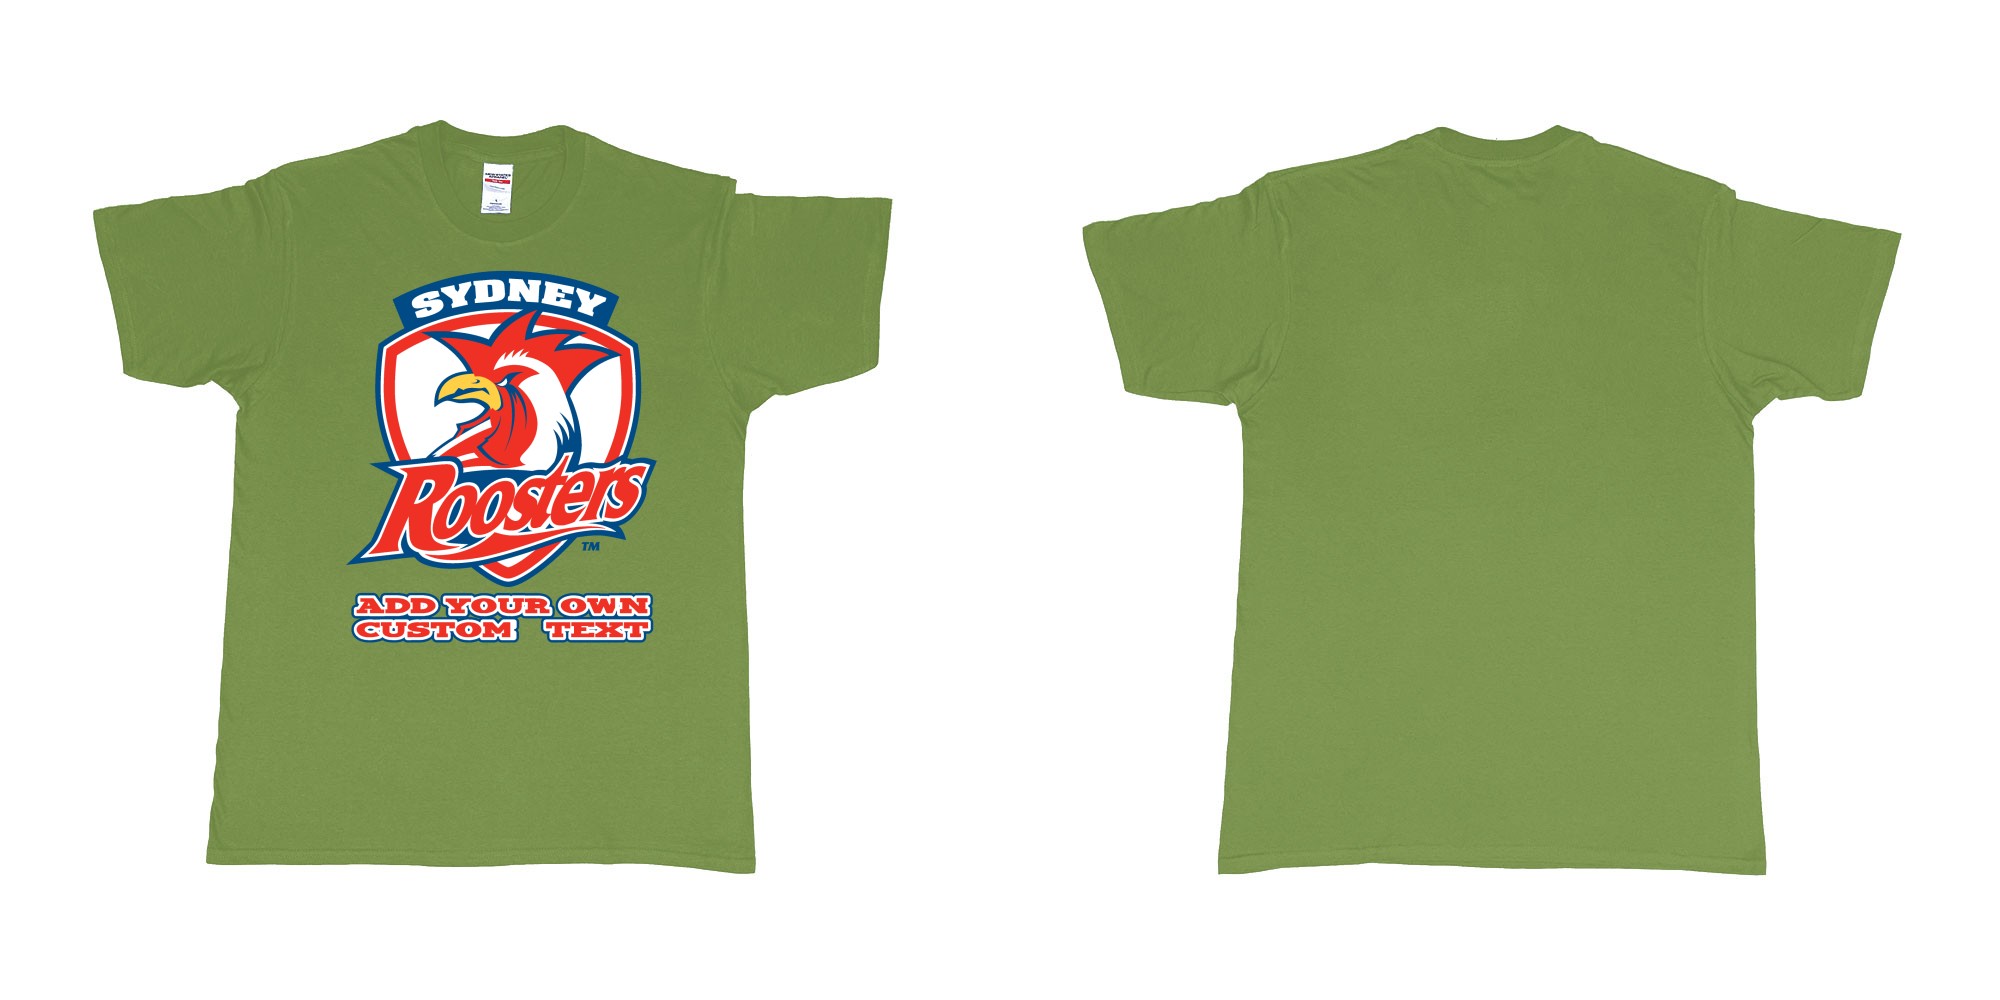 Custom tshirt design sydney roosters custom NRL design in fabric color military-green choice your own text made in Bali by The Pirate Way